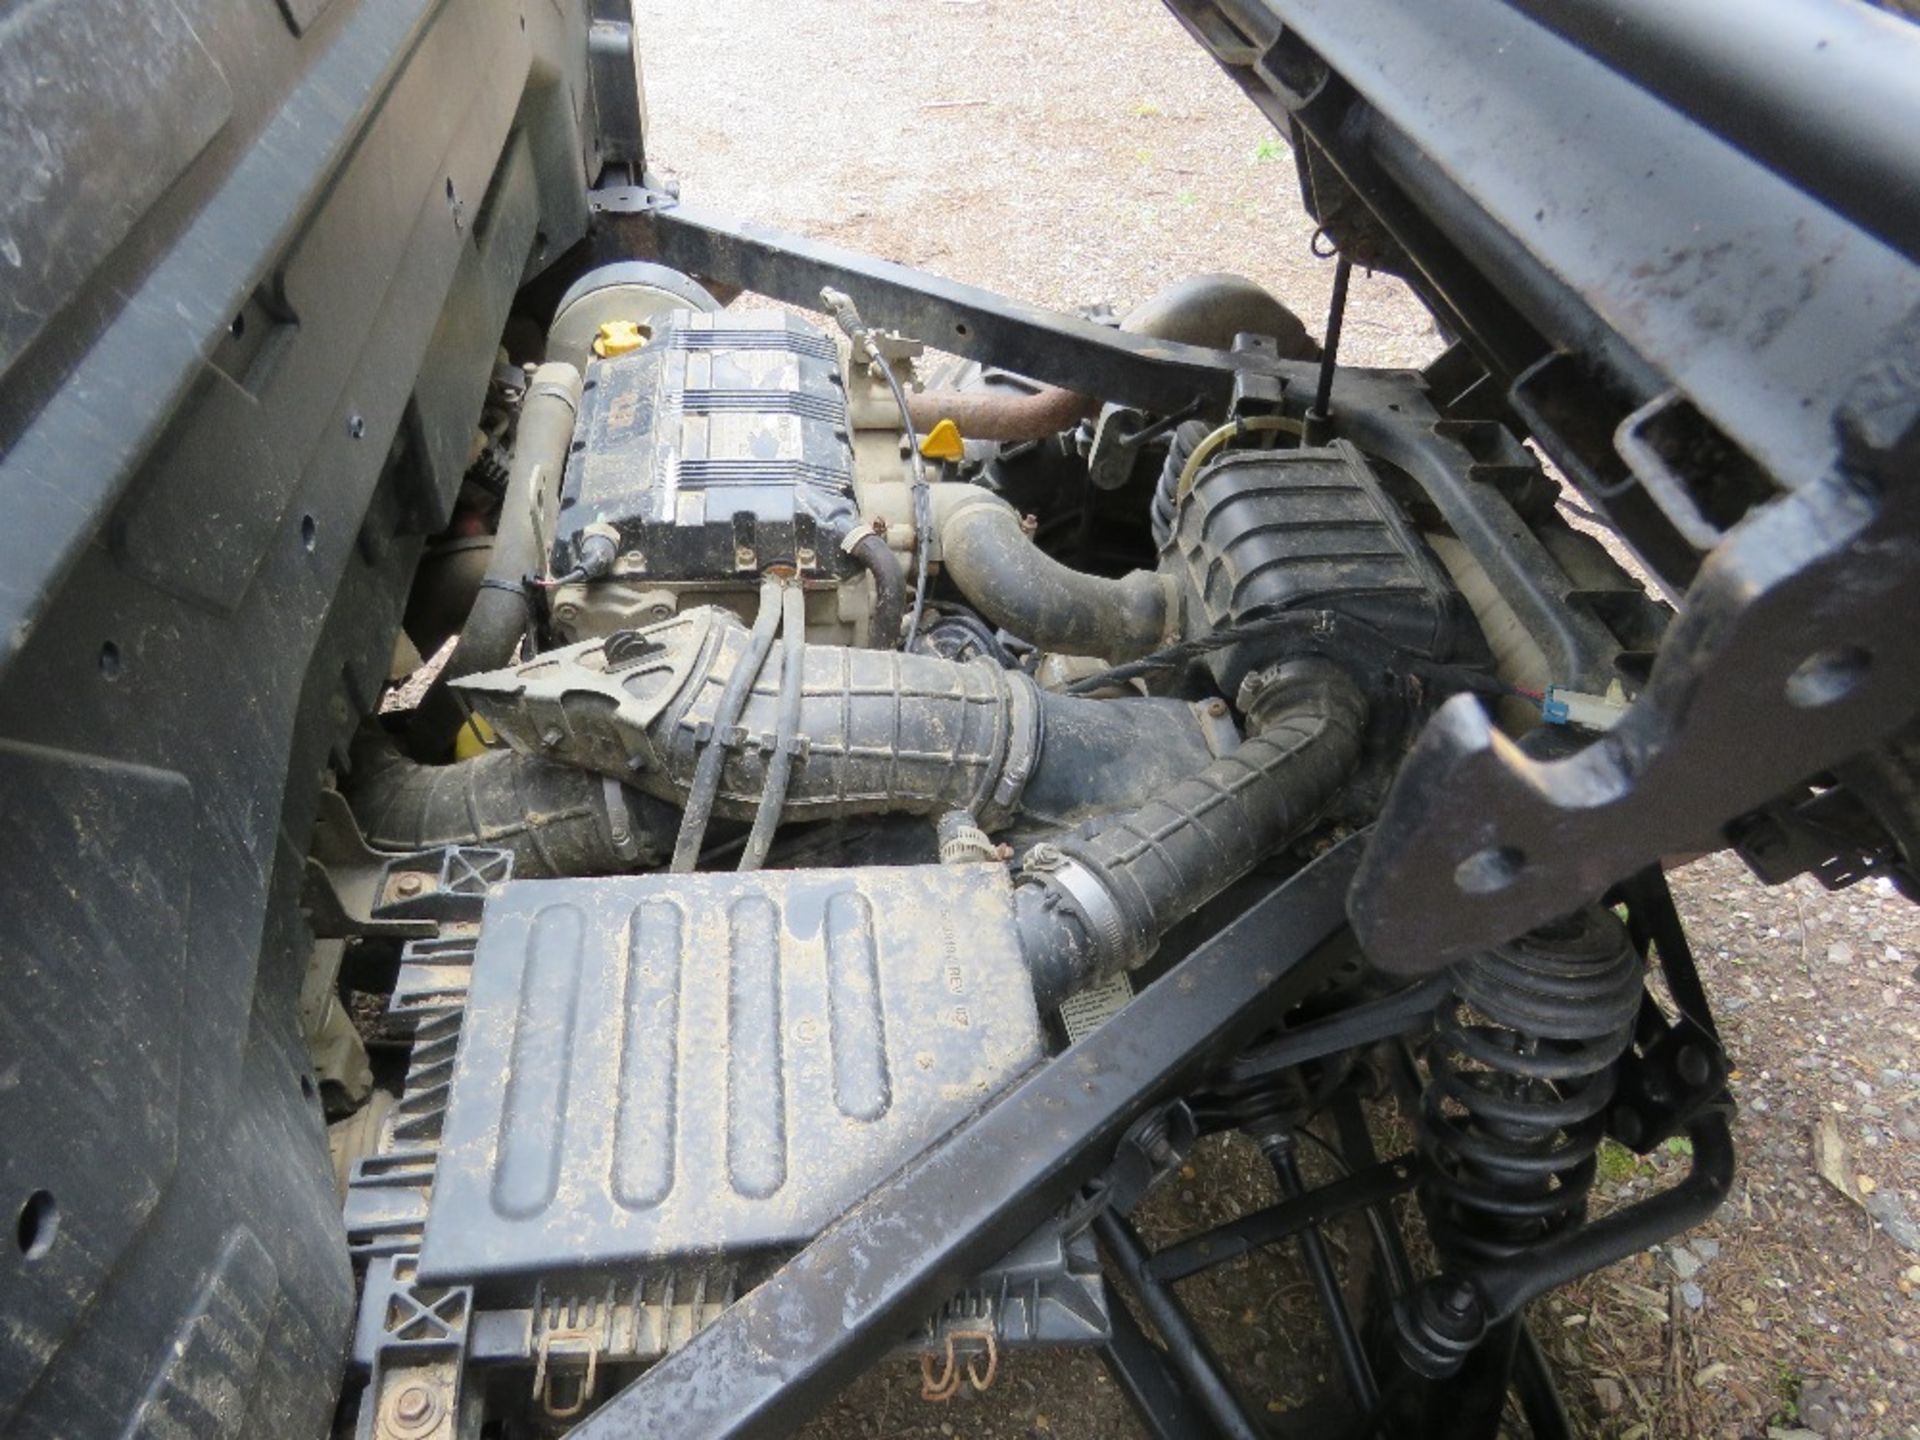 POLARIS RANGER DIESEL RTV REG:EU65 CLO. WHEN TESTED WAS SEEN TO DRIVE, STEER AND BRAKE......REQUIRES - Image 5 of 9